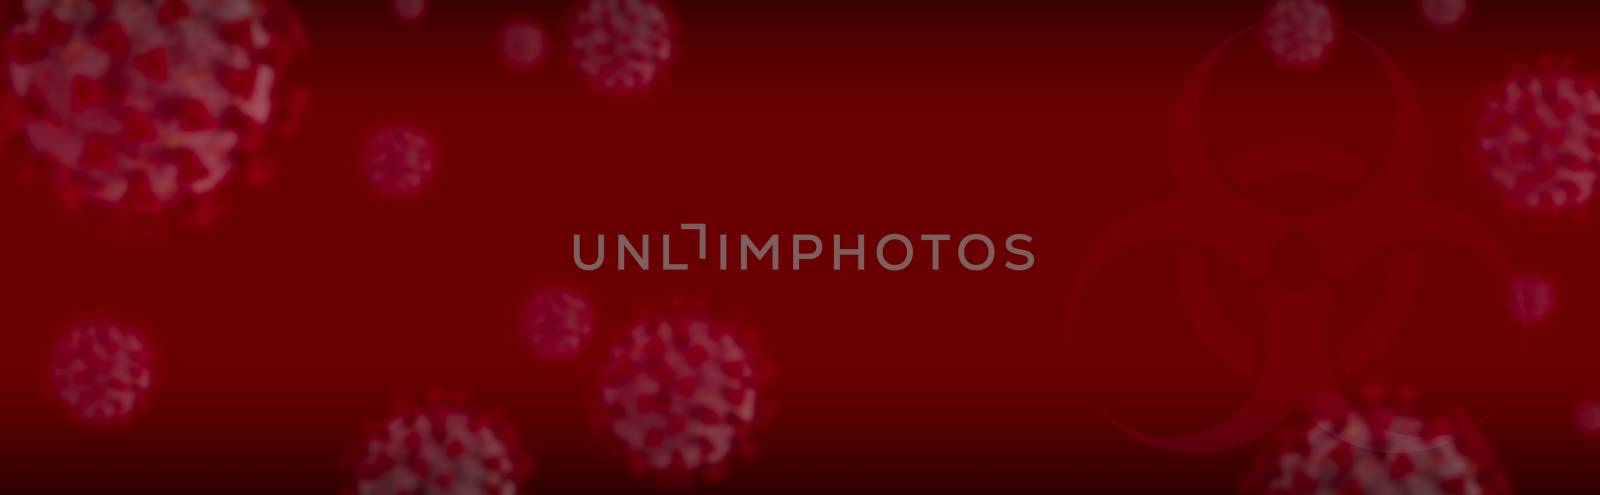 Red Banner of Coronavirus COVID-19 Cells Background by Feverpitched